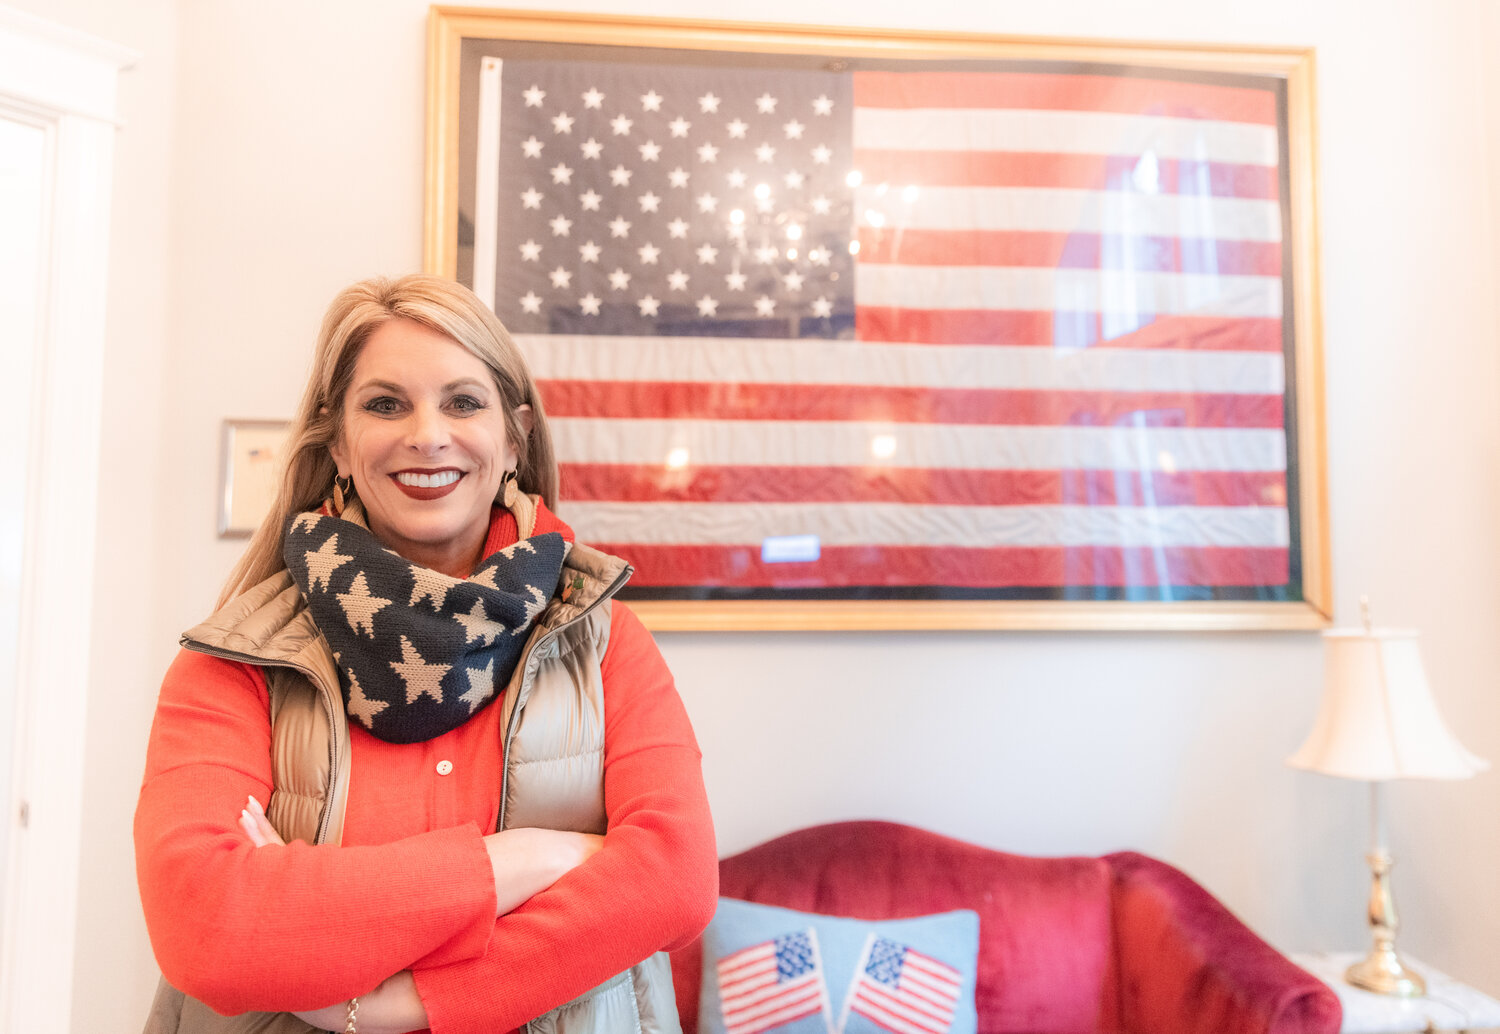 Leslie Lewallen smiles for a photo in front of a flag that once flew over the White House Tuesday morning at her Camas home.